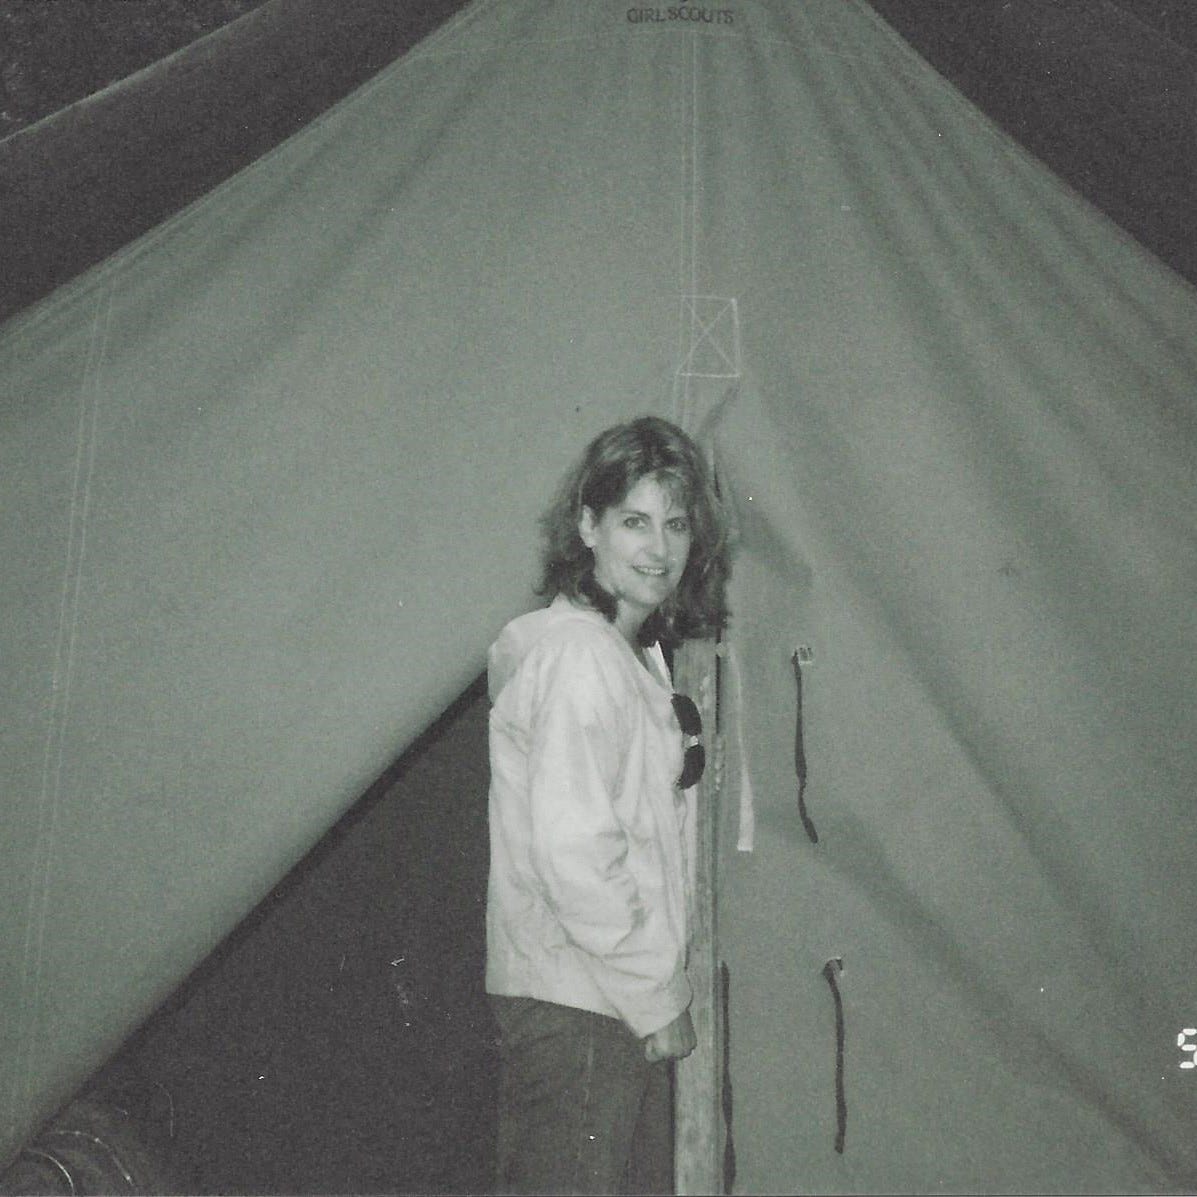 40-something woman cautiously peels back the flap of her tent